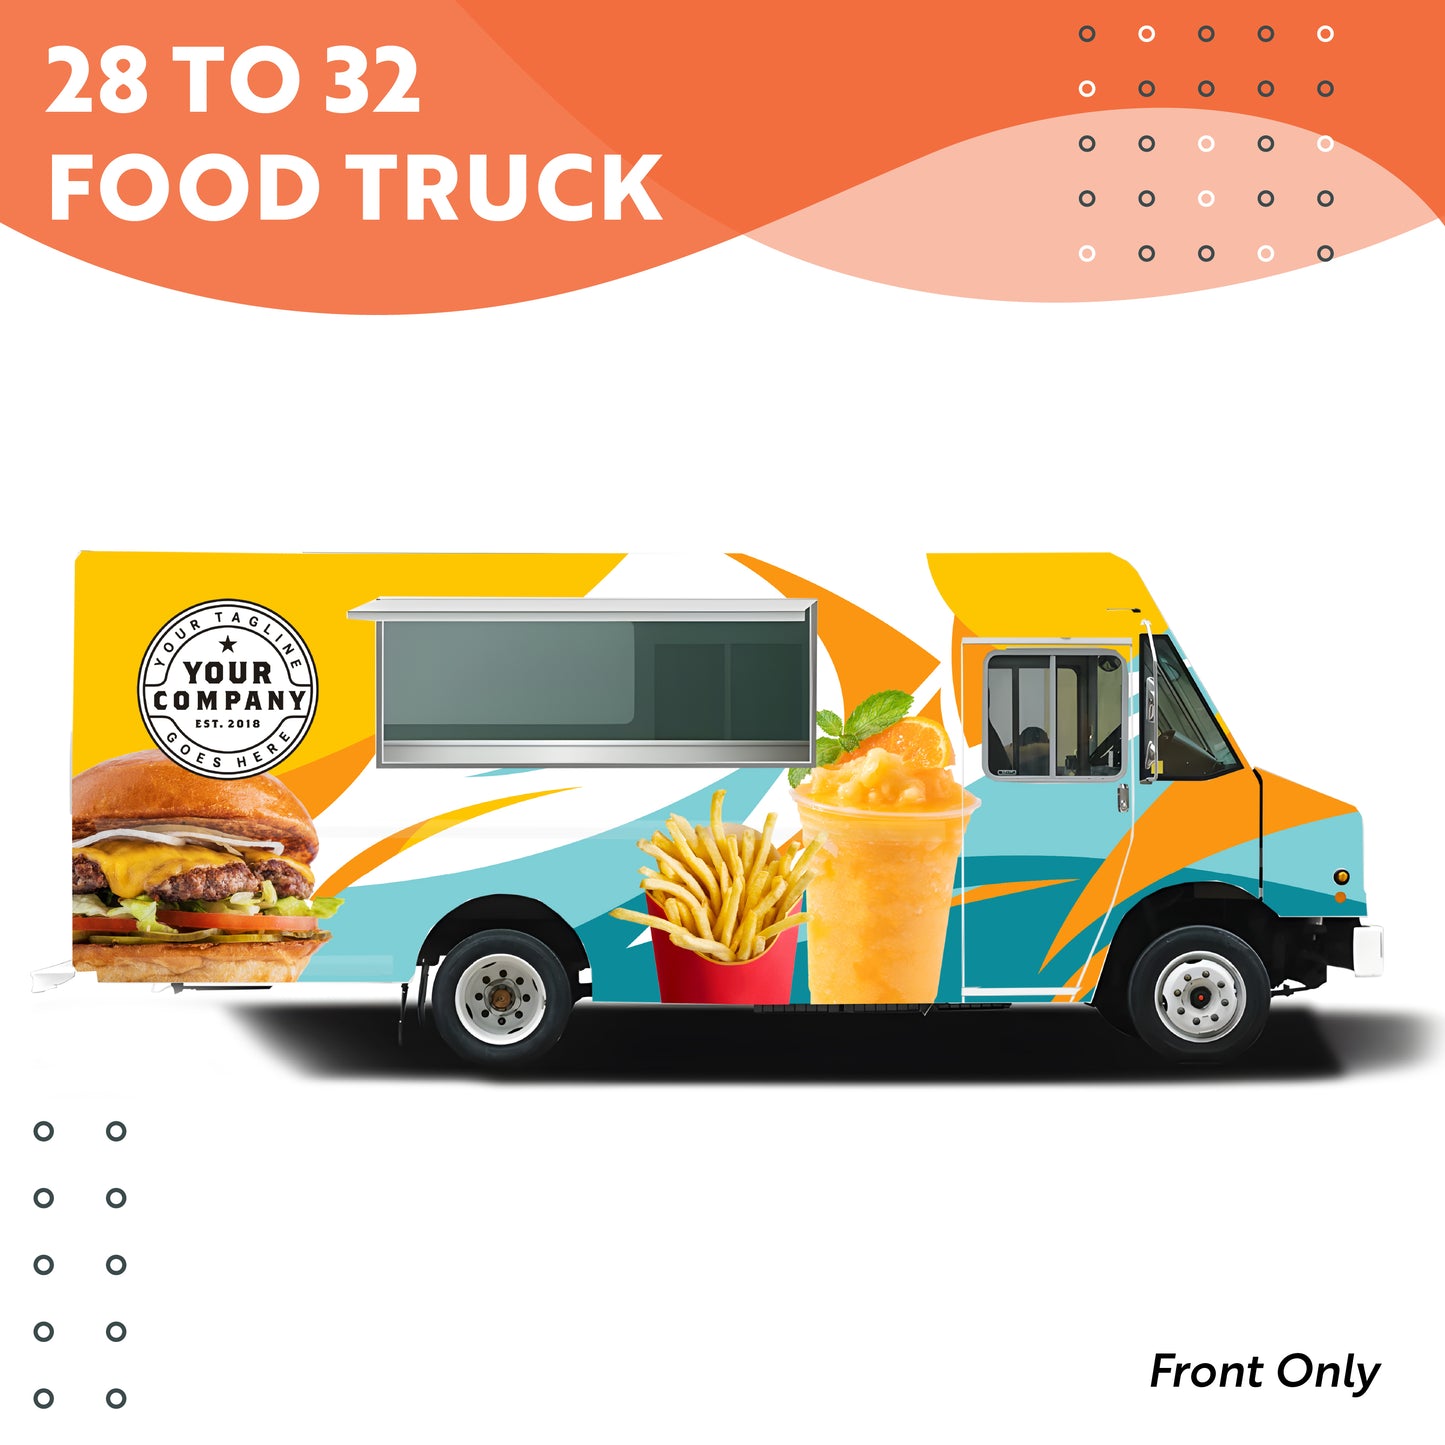 28 to 32 Food Truck